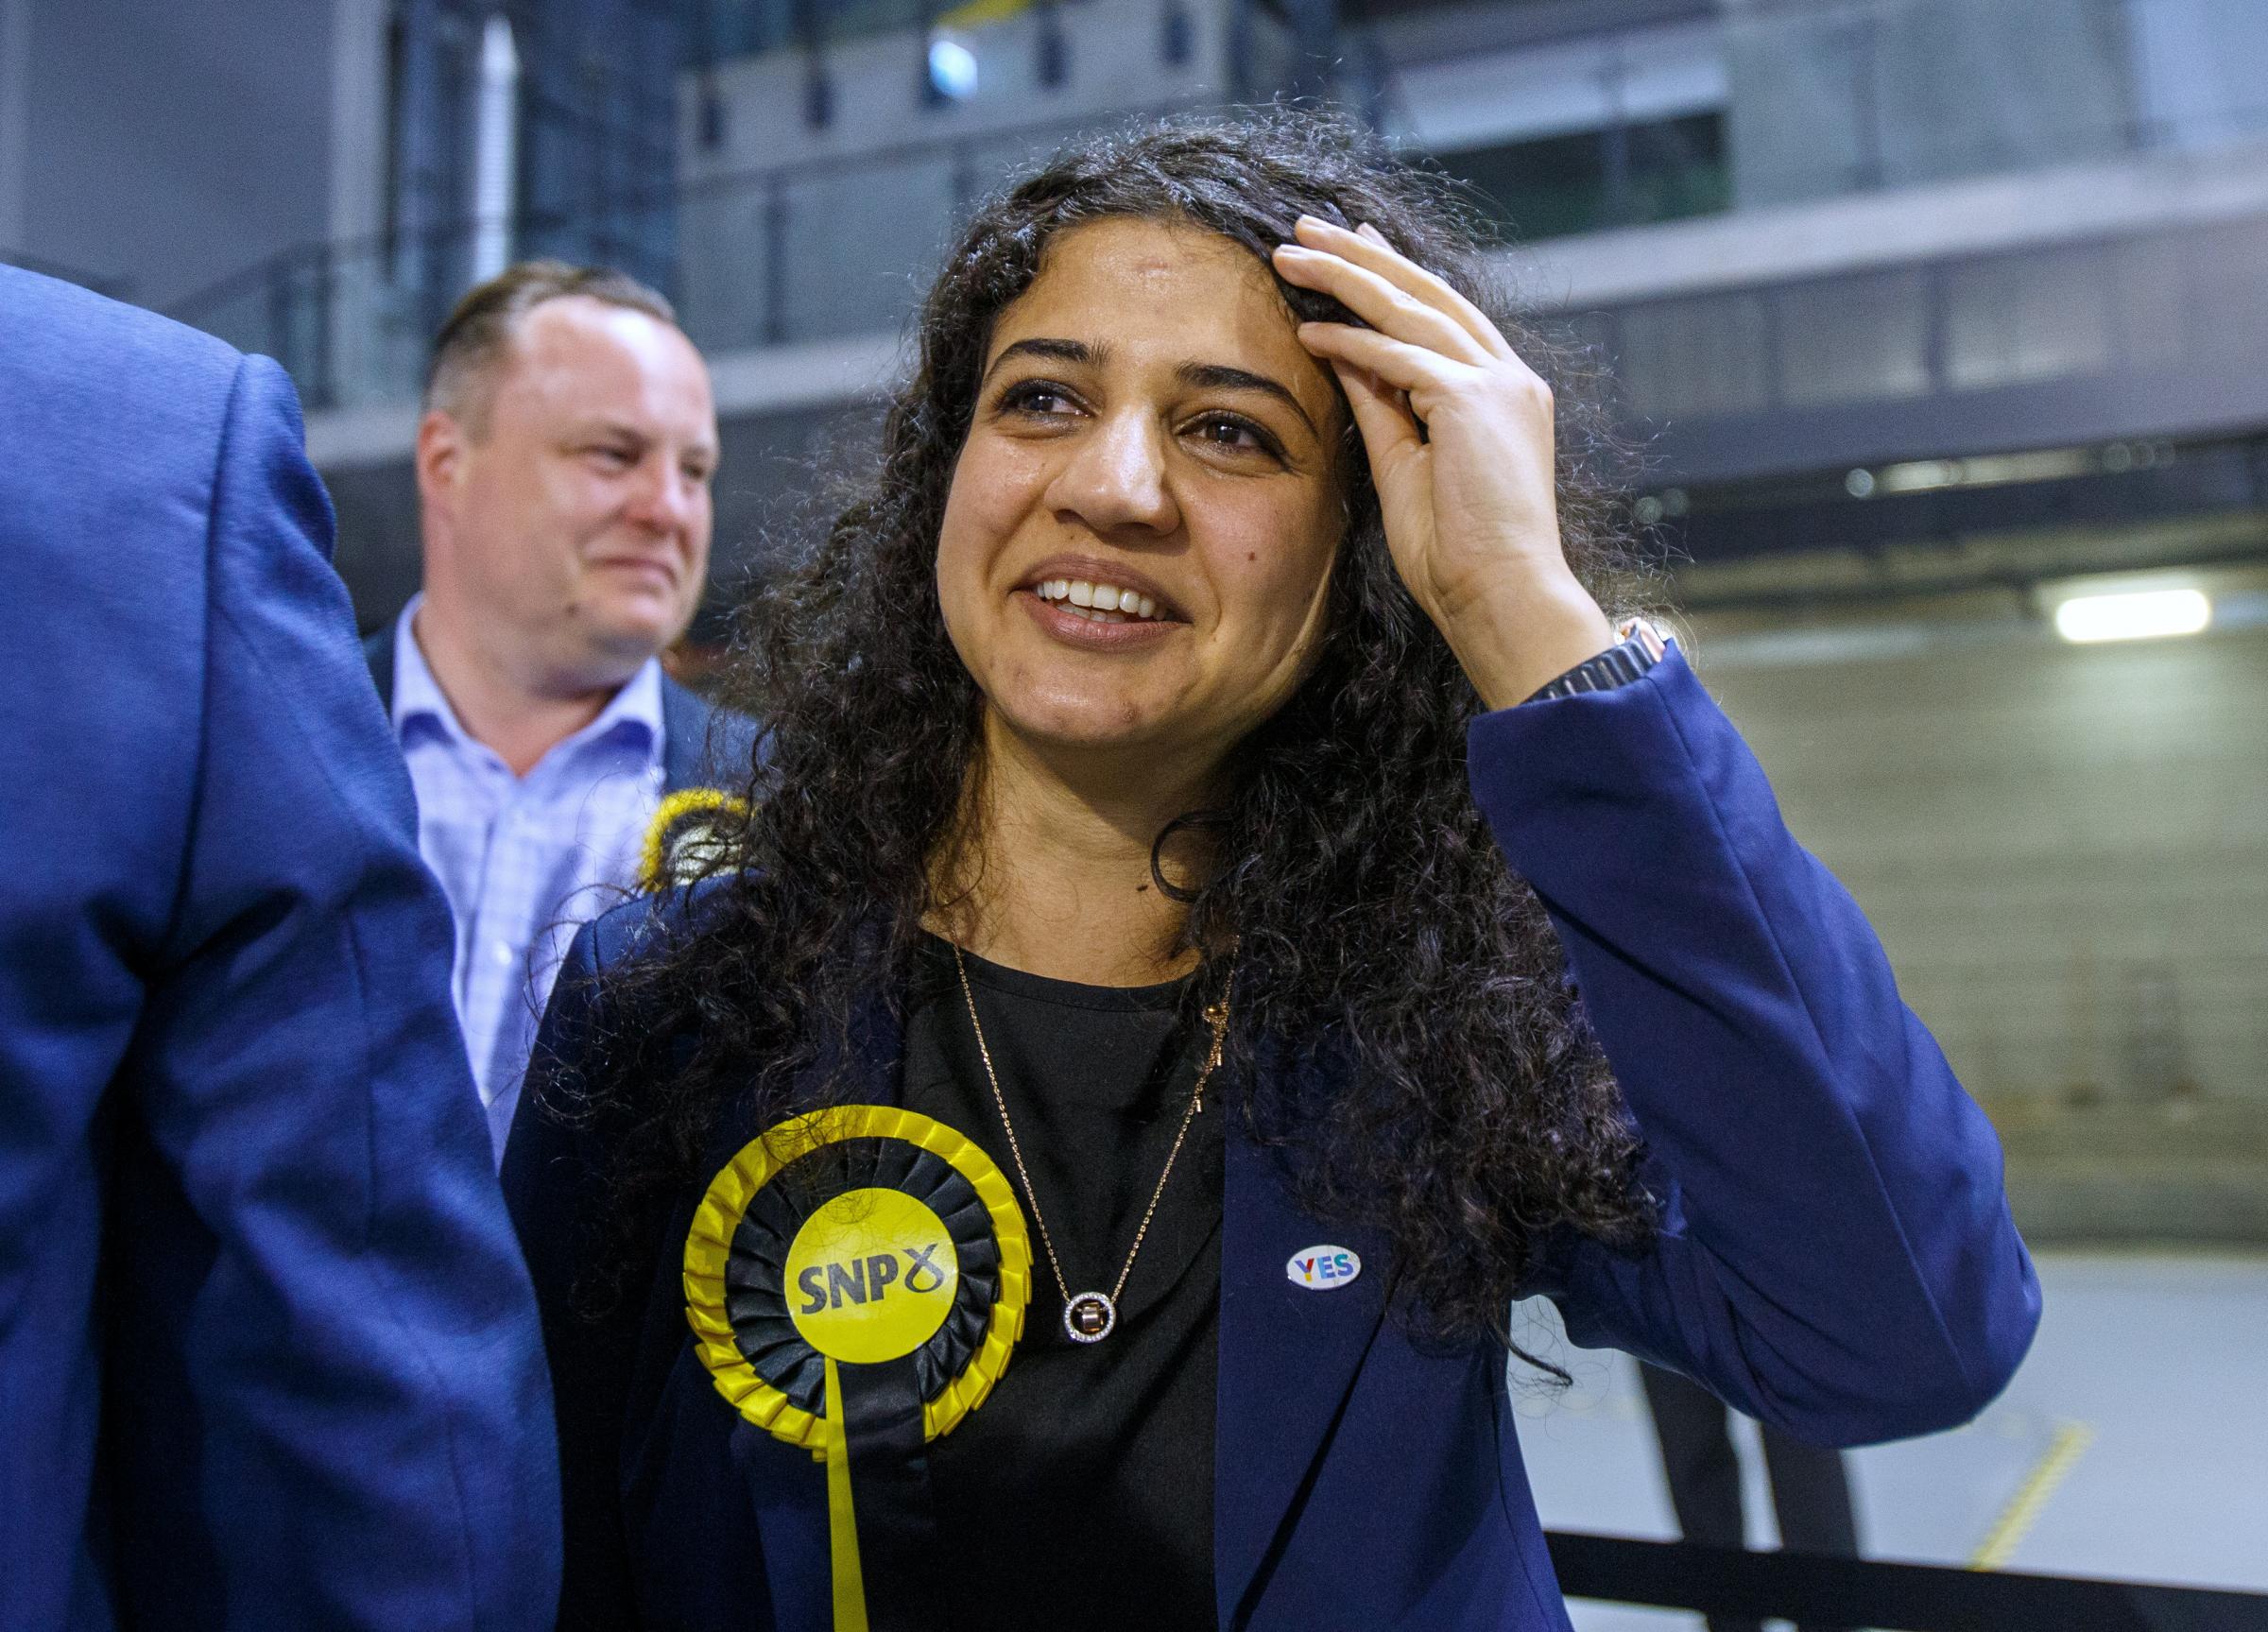 Newly elected Roza Salih celebrating after becoming SNP councillor for the Greater Pollok ward for Glasgow City Council. Photograph by Colin Mearns.